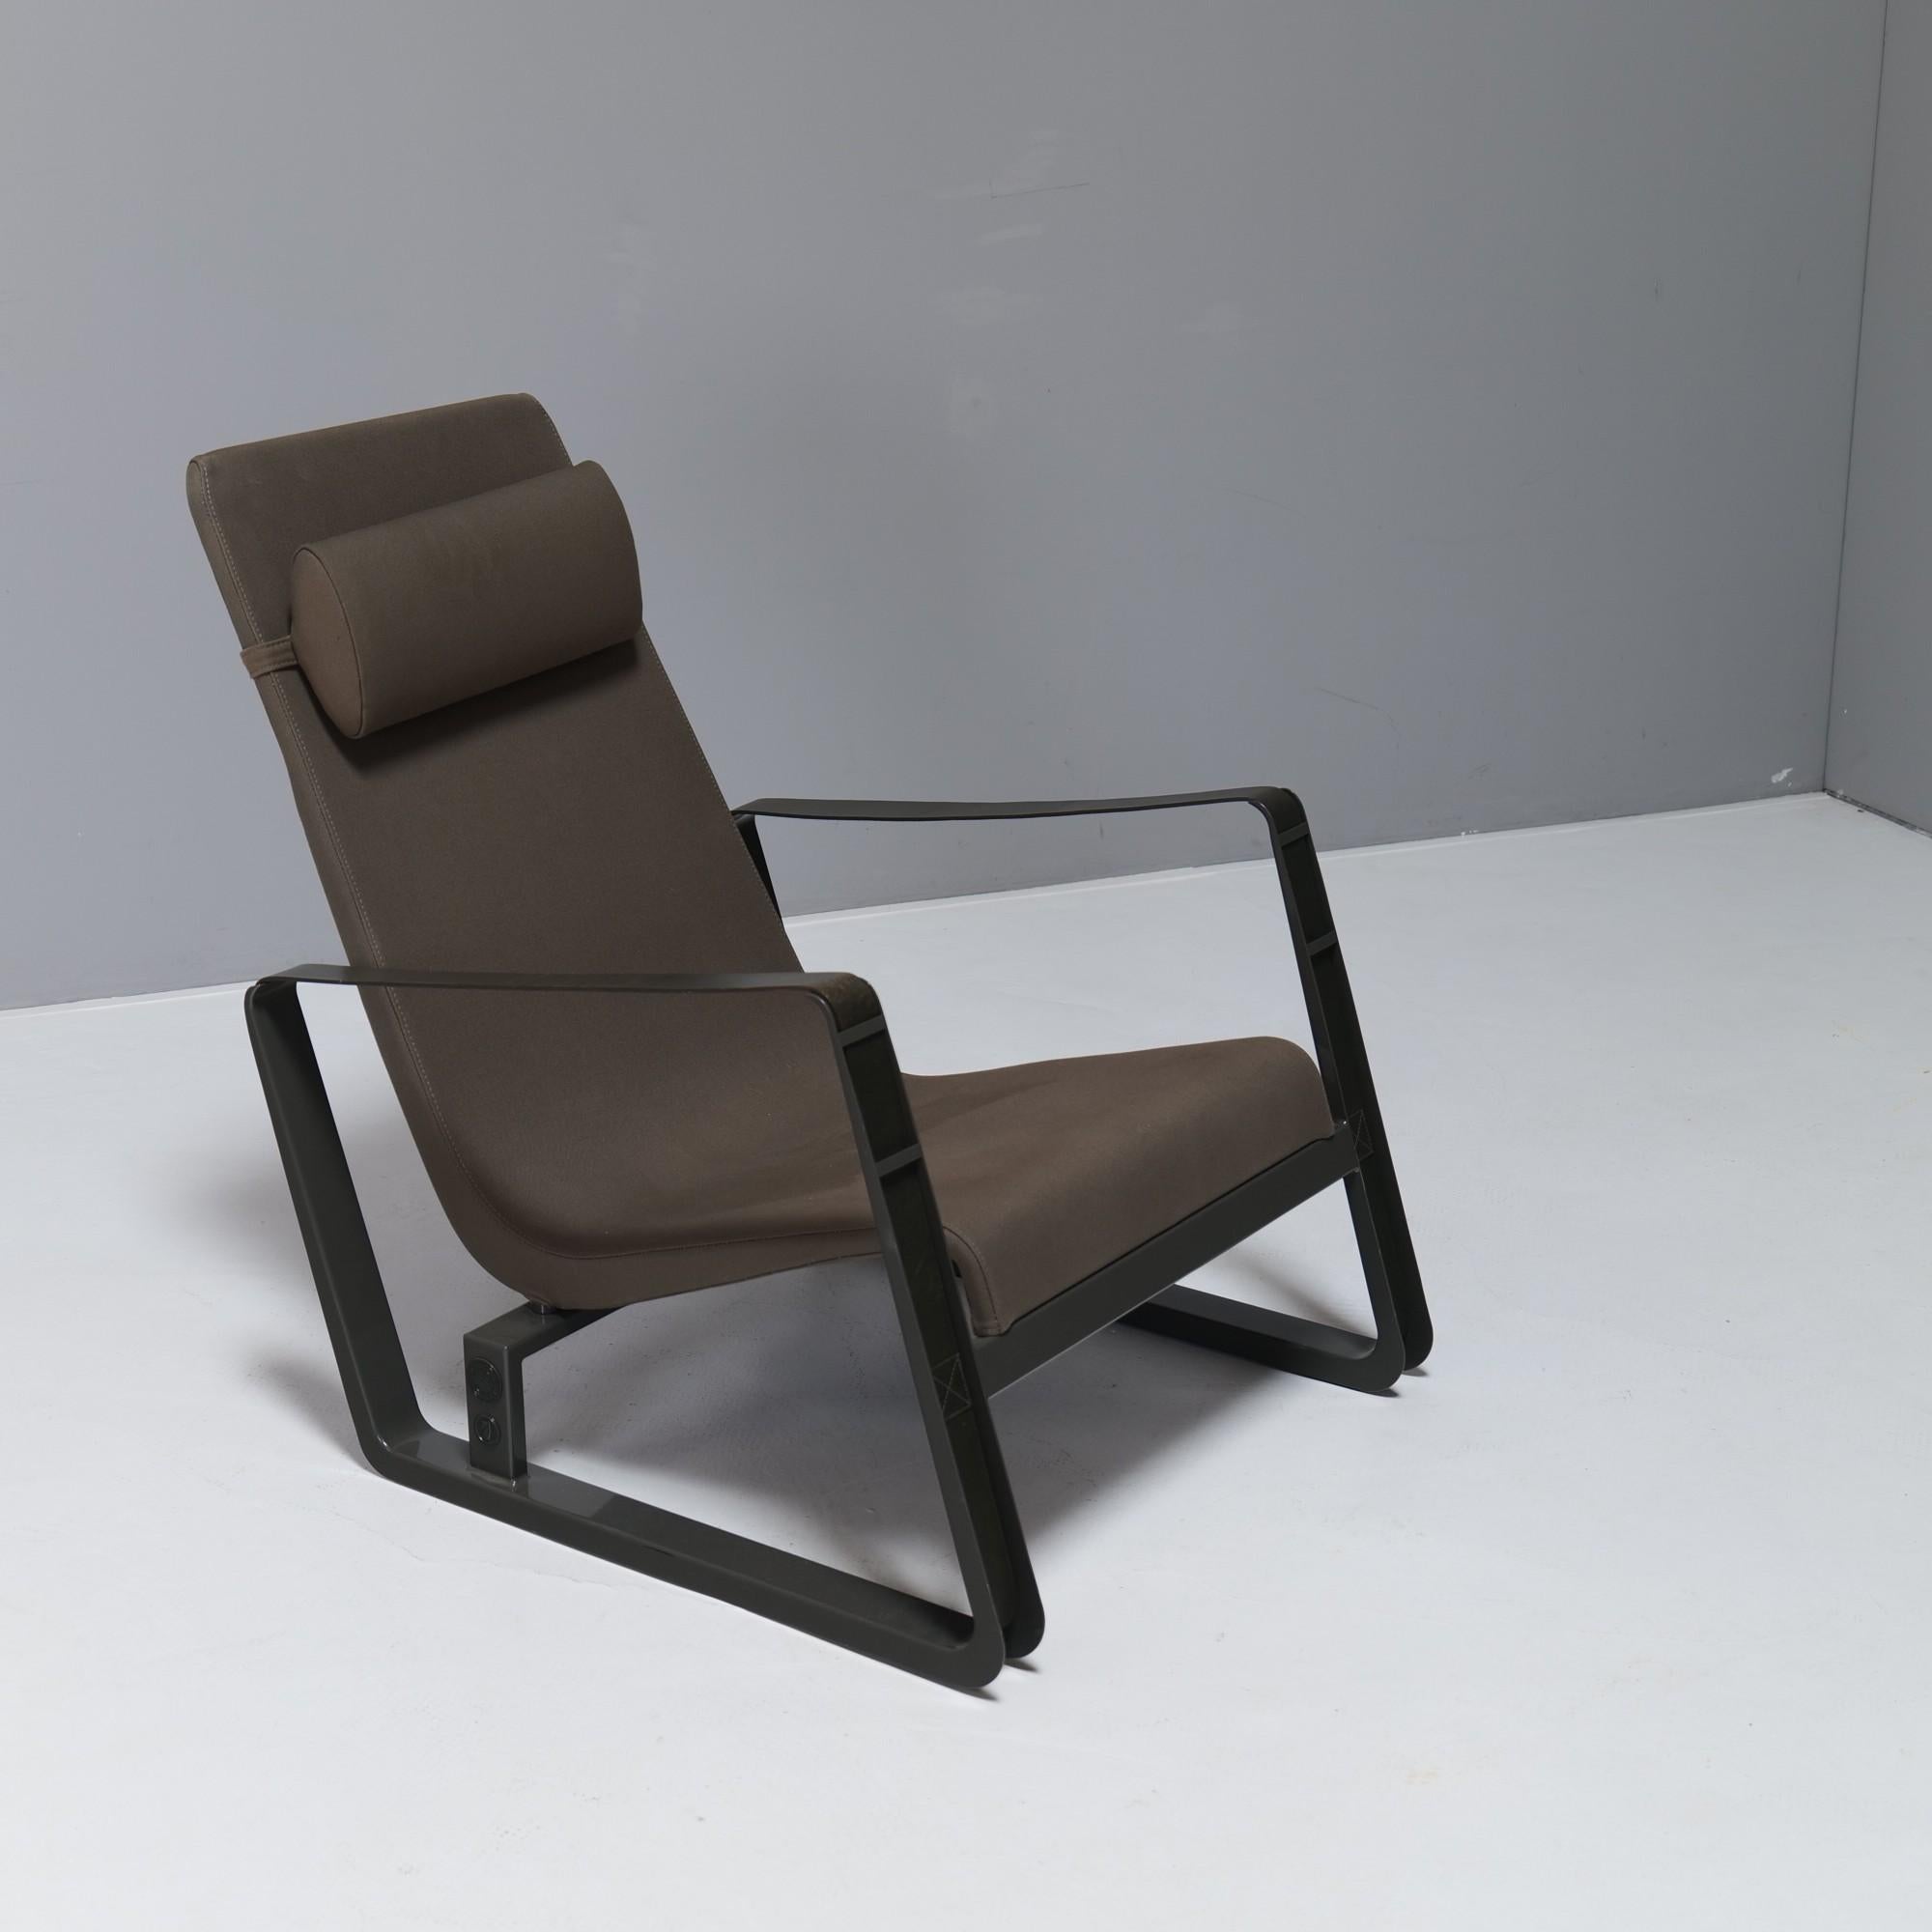 Industrial Limited edition Cité armchair by Jean Prouvé for Vitra x G-Star Raw #50